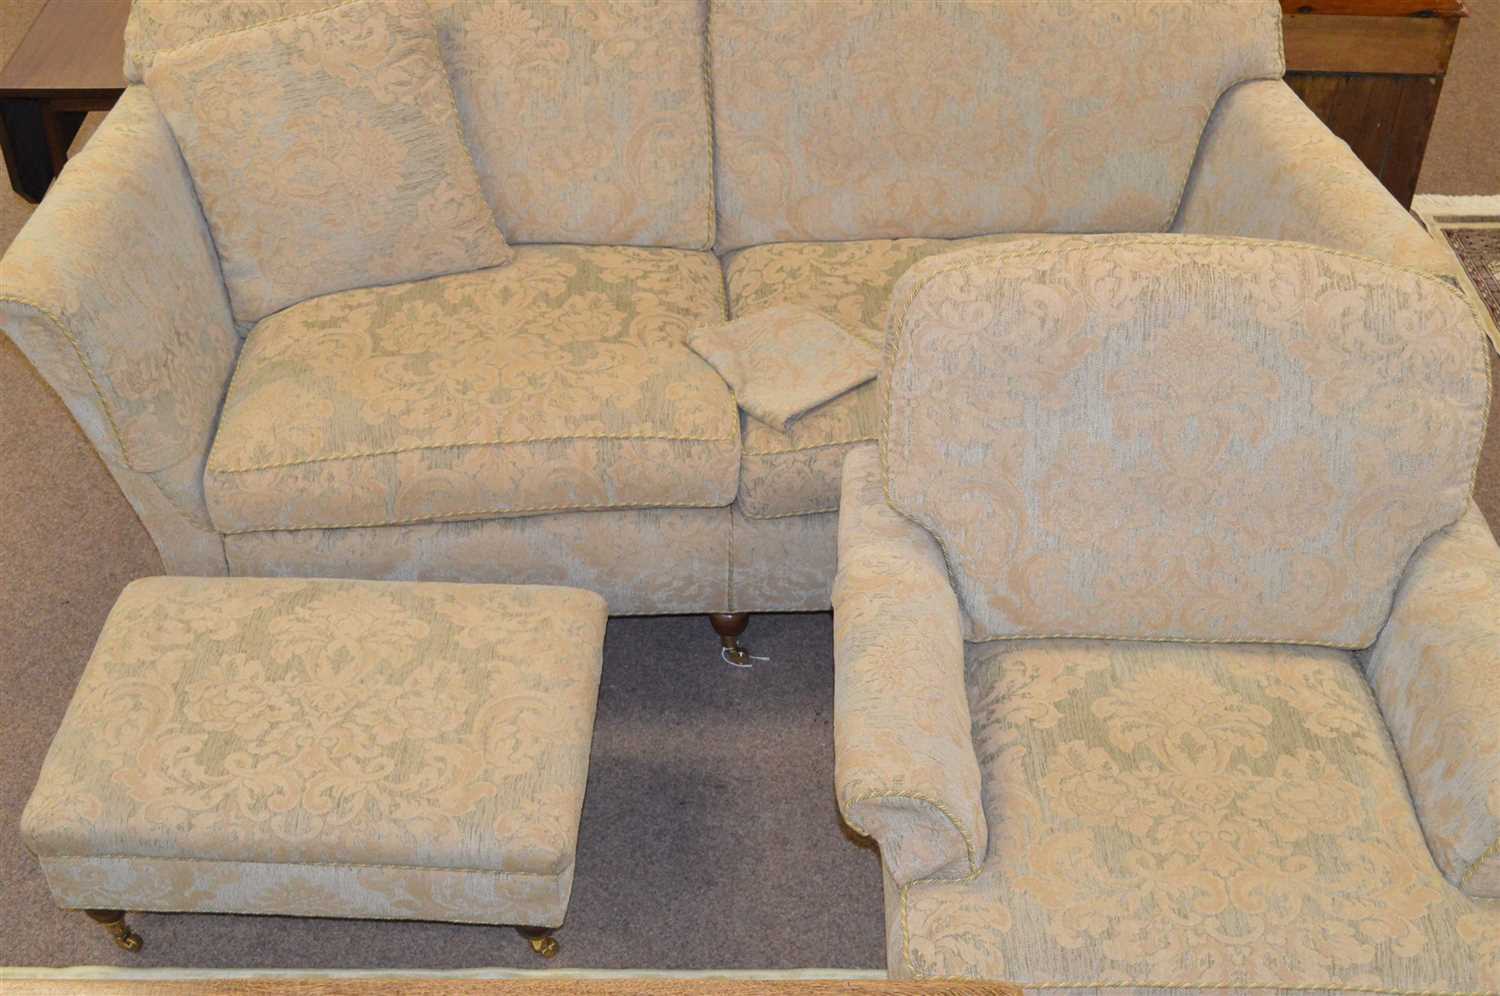 Lot 981 - Sofa, chair and foot stool